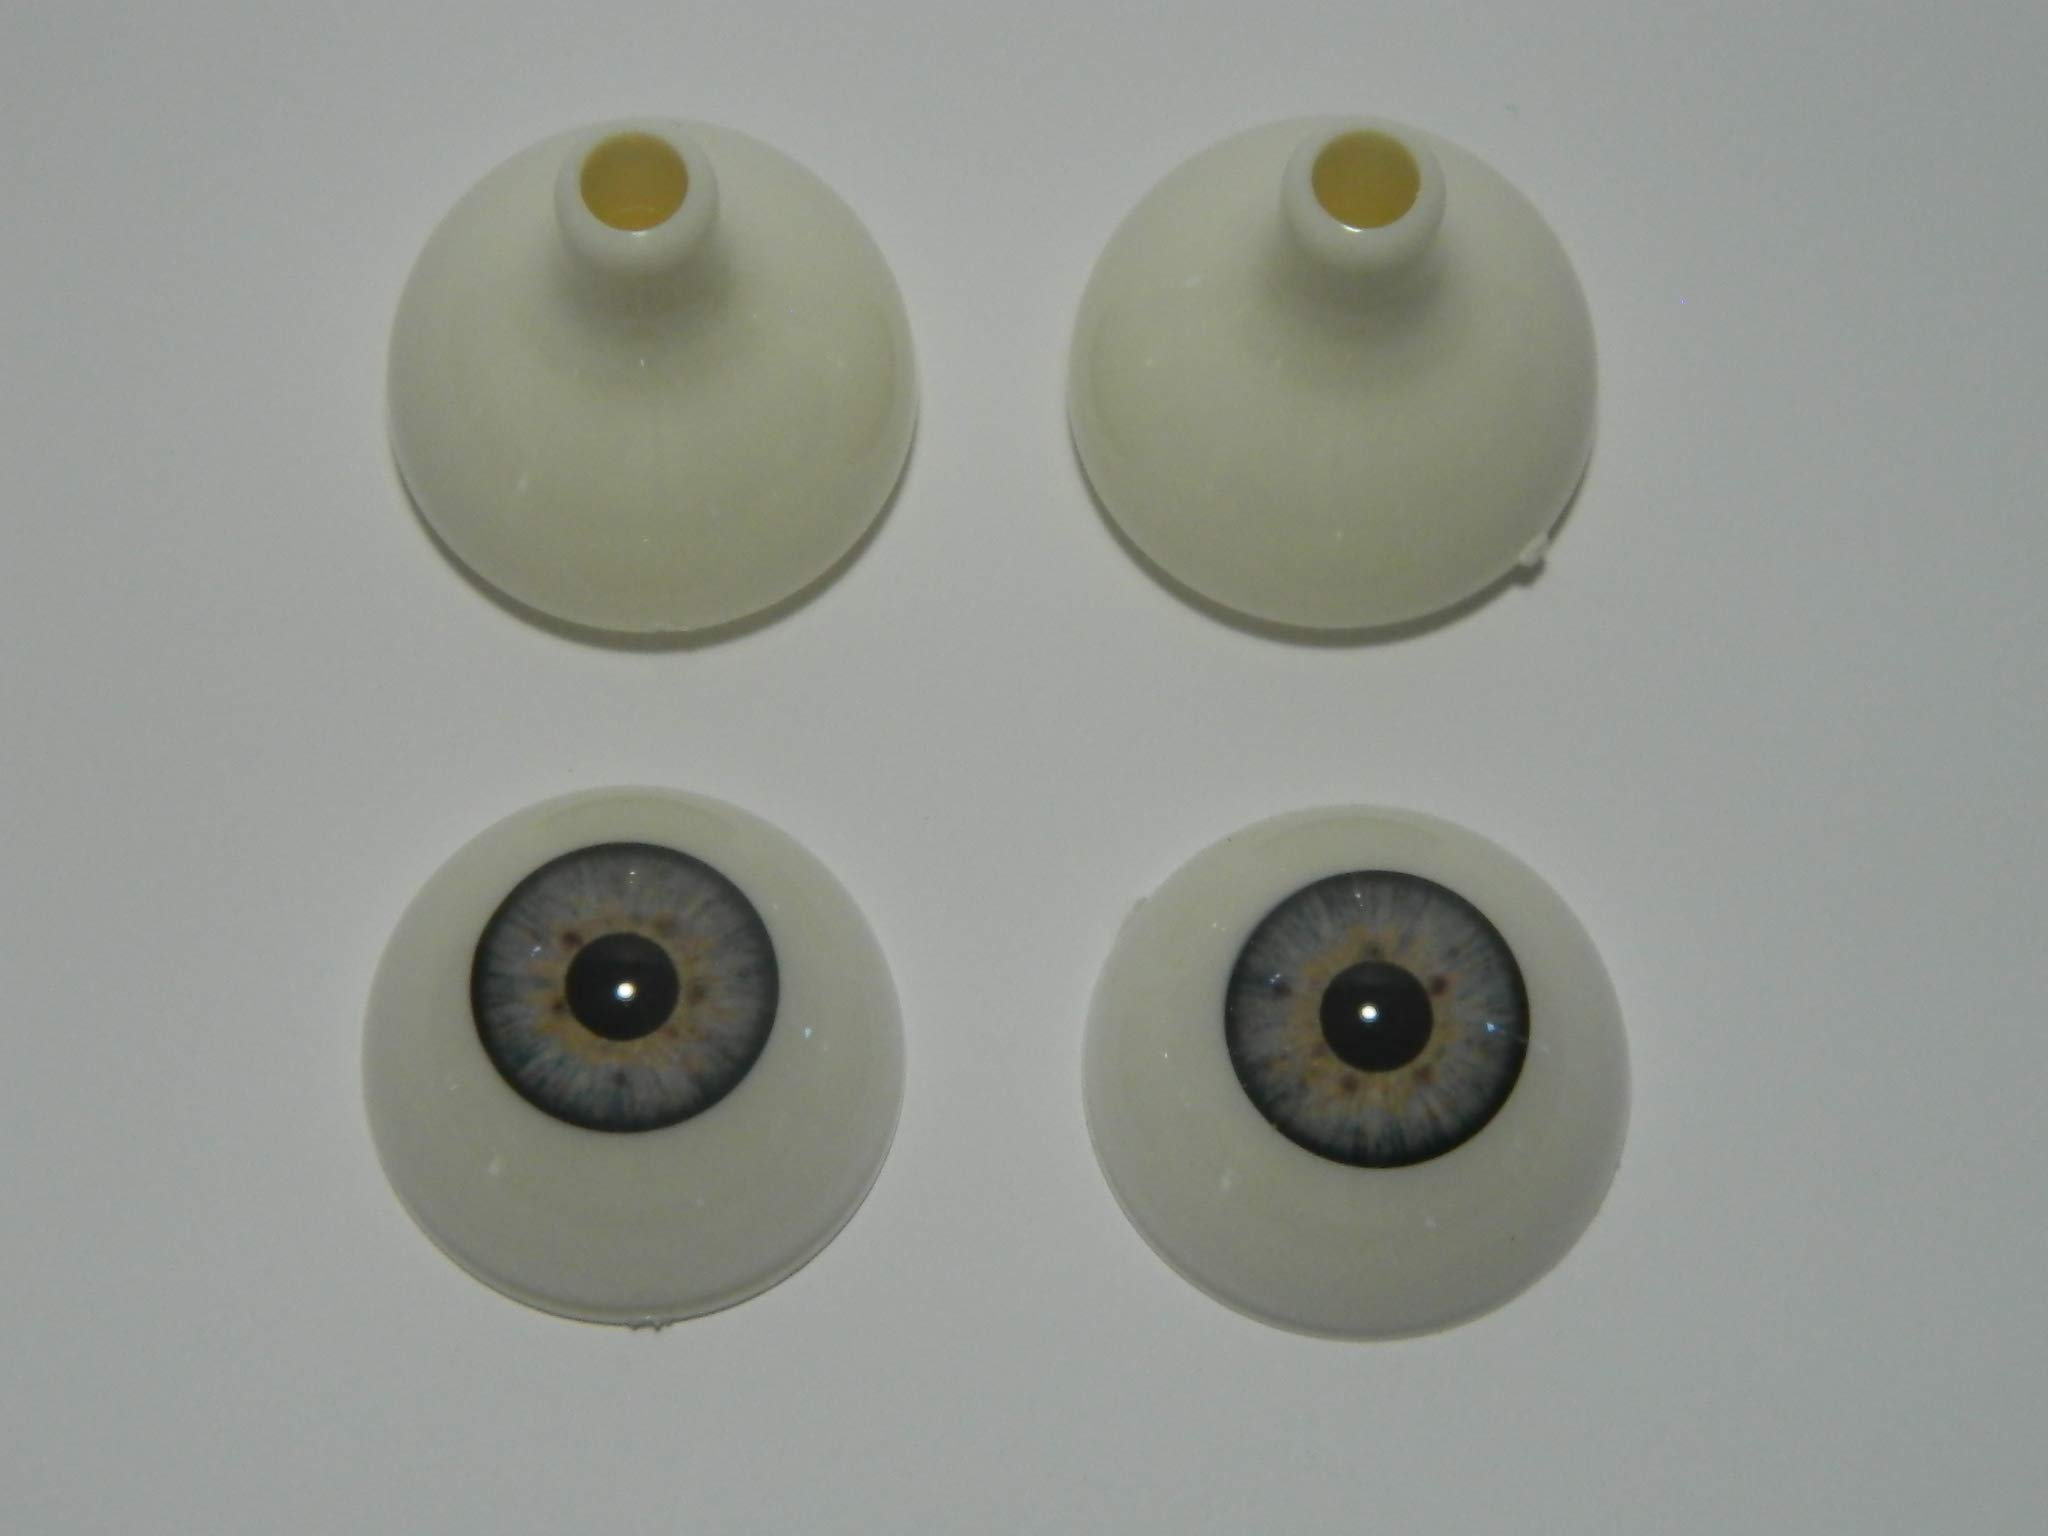 Dead Head Props Pair of Premium Realistic Life Size Acrylic Eyes for Halloween Props, Masks, Dolls or Bears (Blue 26mm)